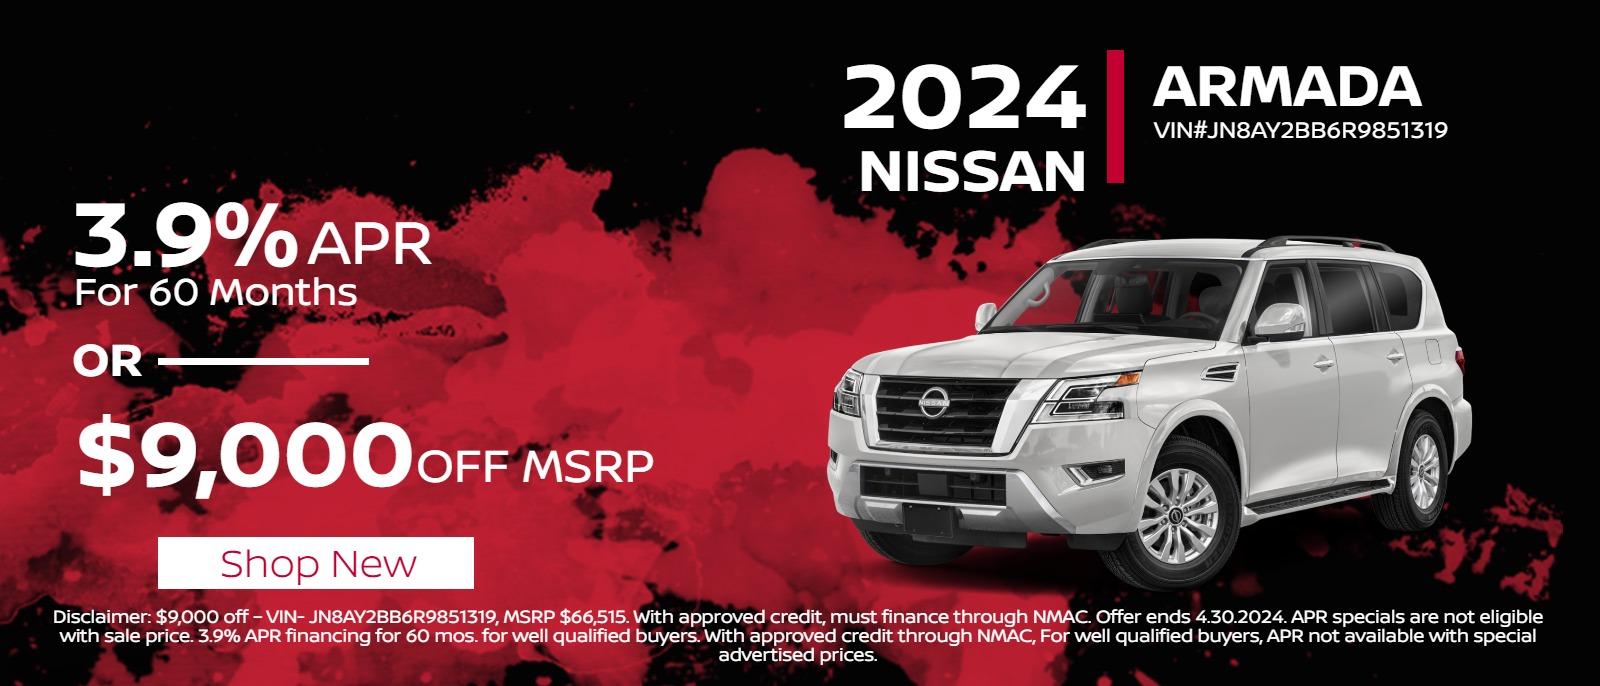 2024 Armada 
3.9% APR for 60 months
 or 
$9,000 off MSRP